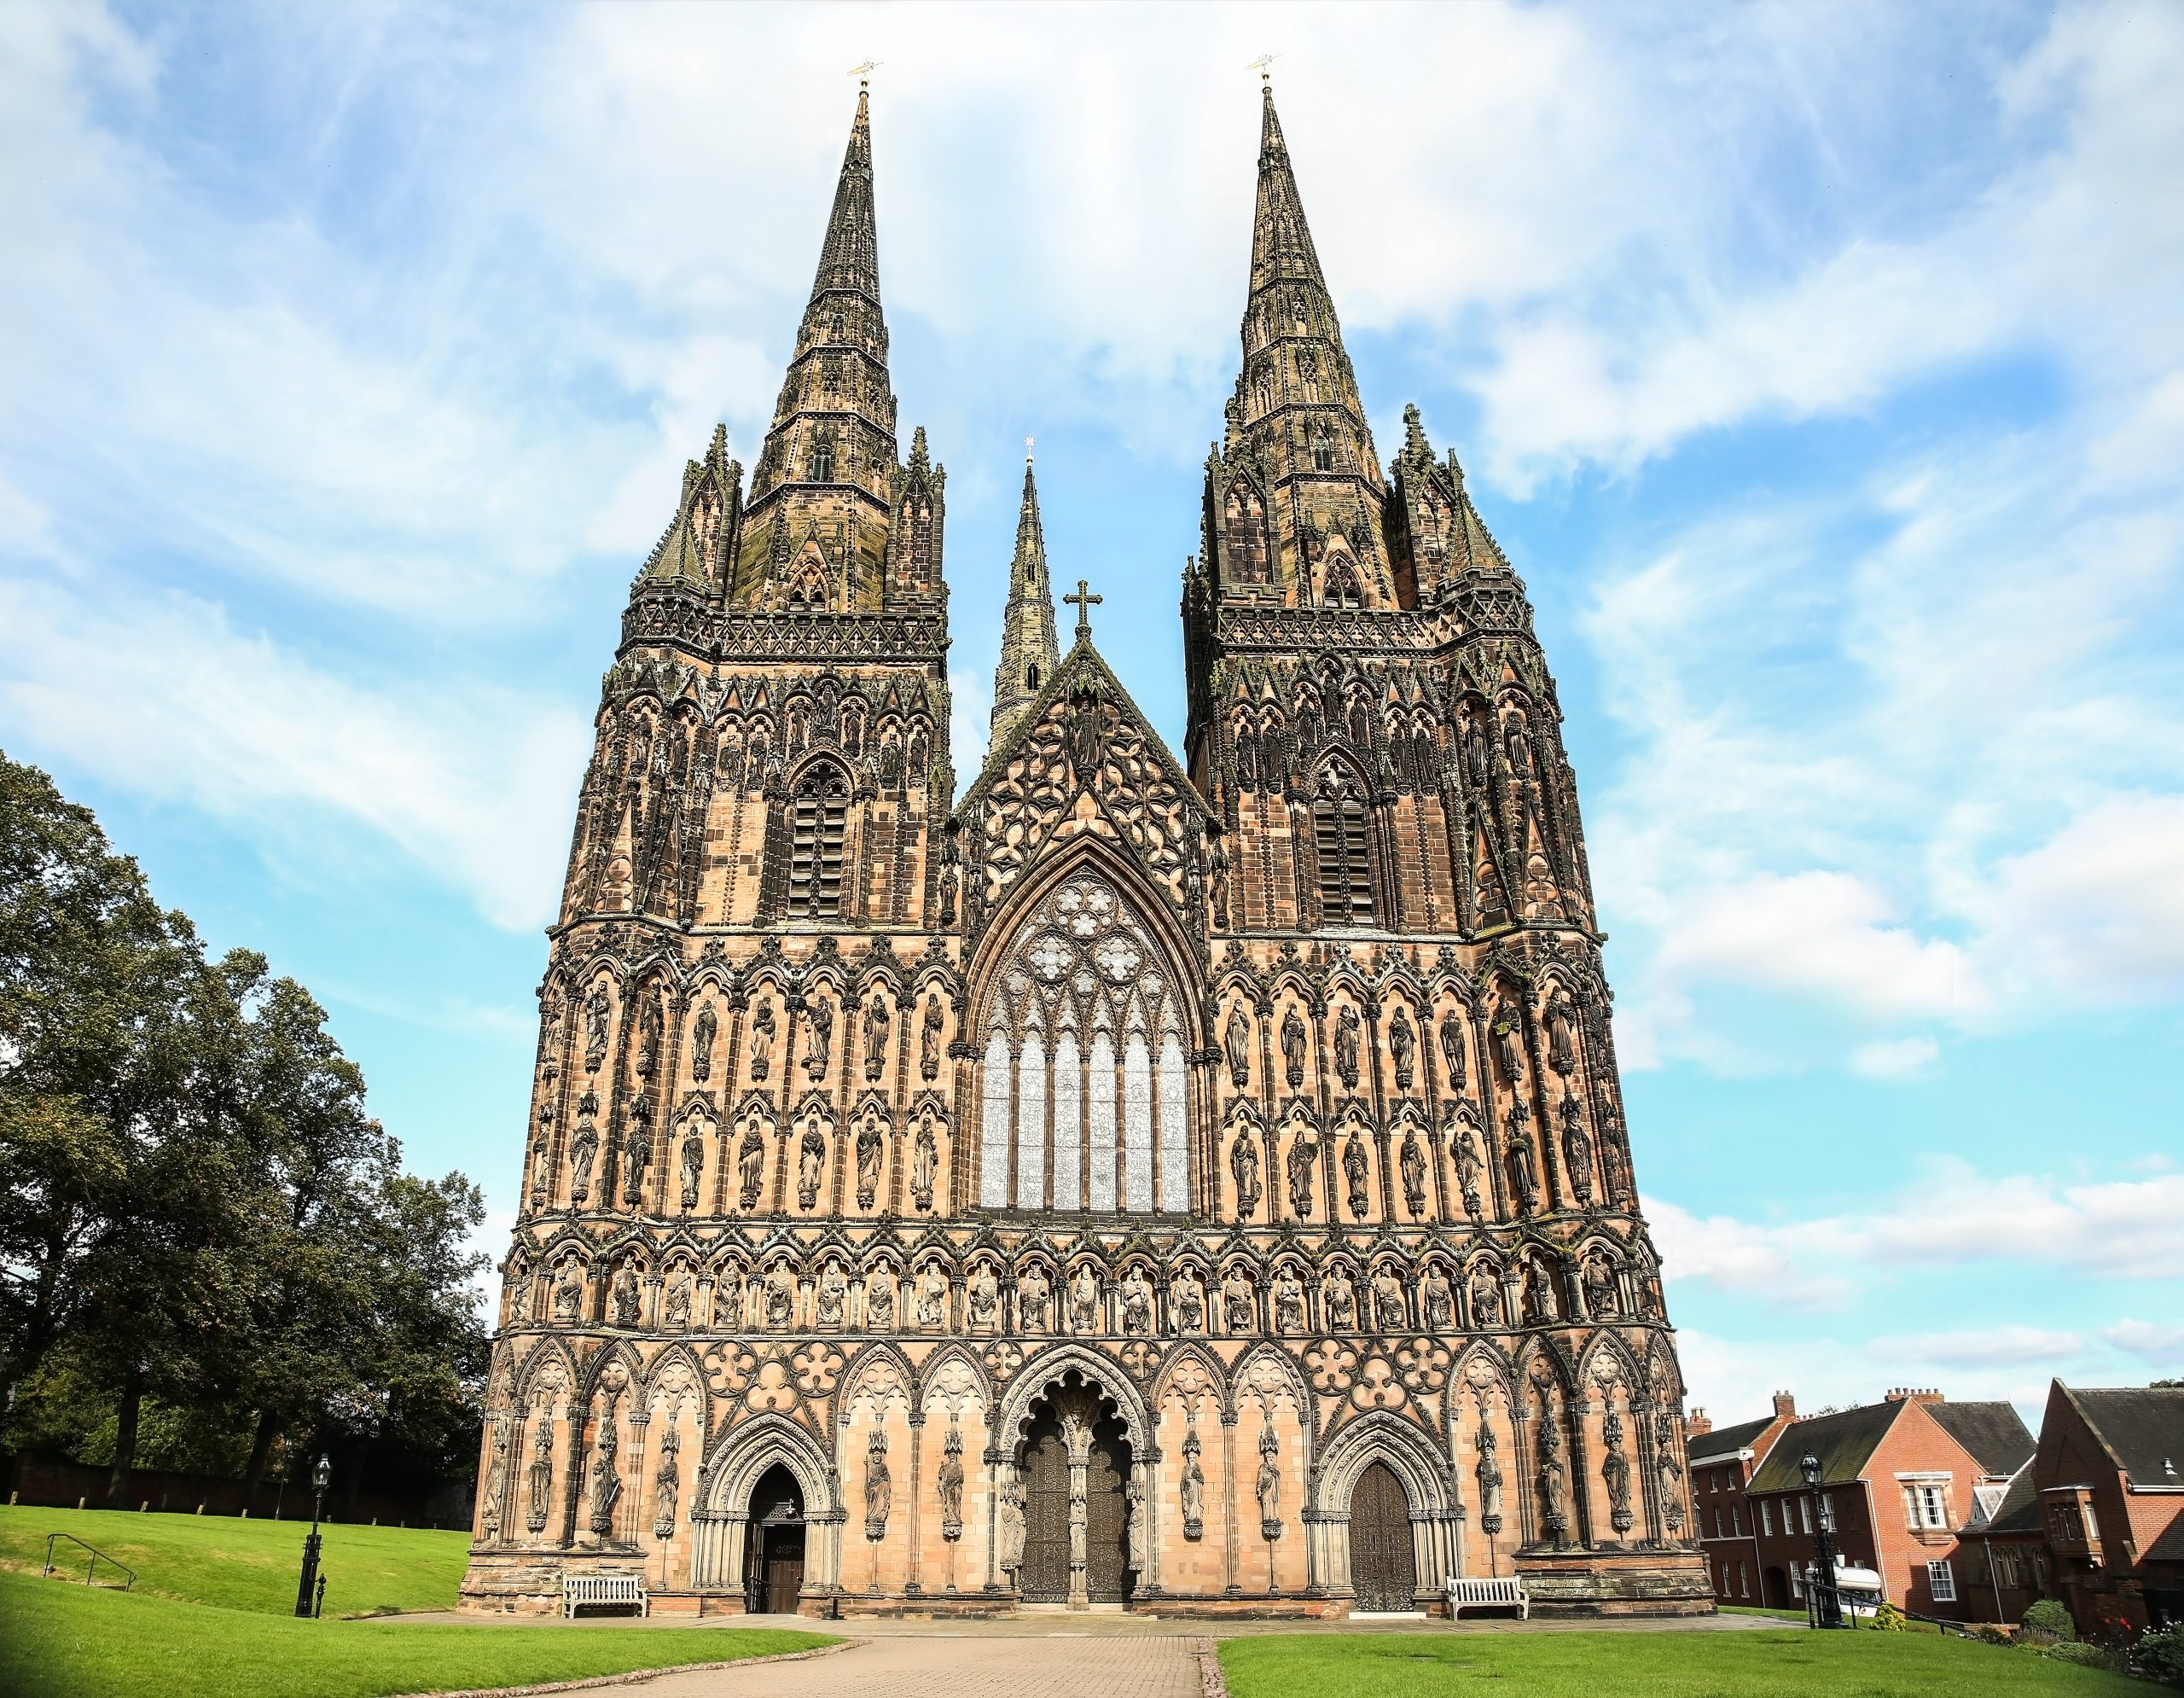 places to visit in lichfield